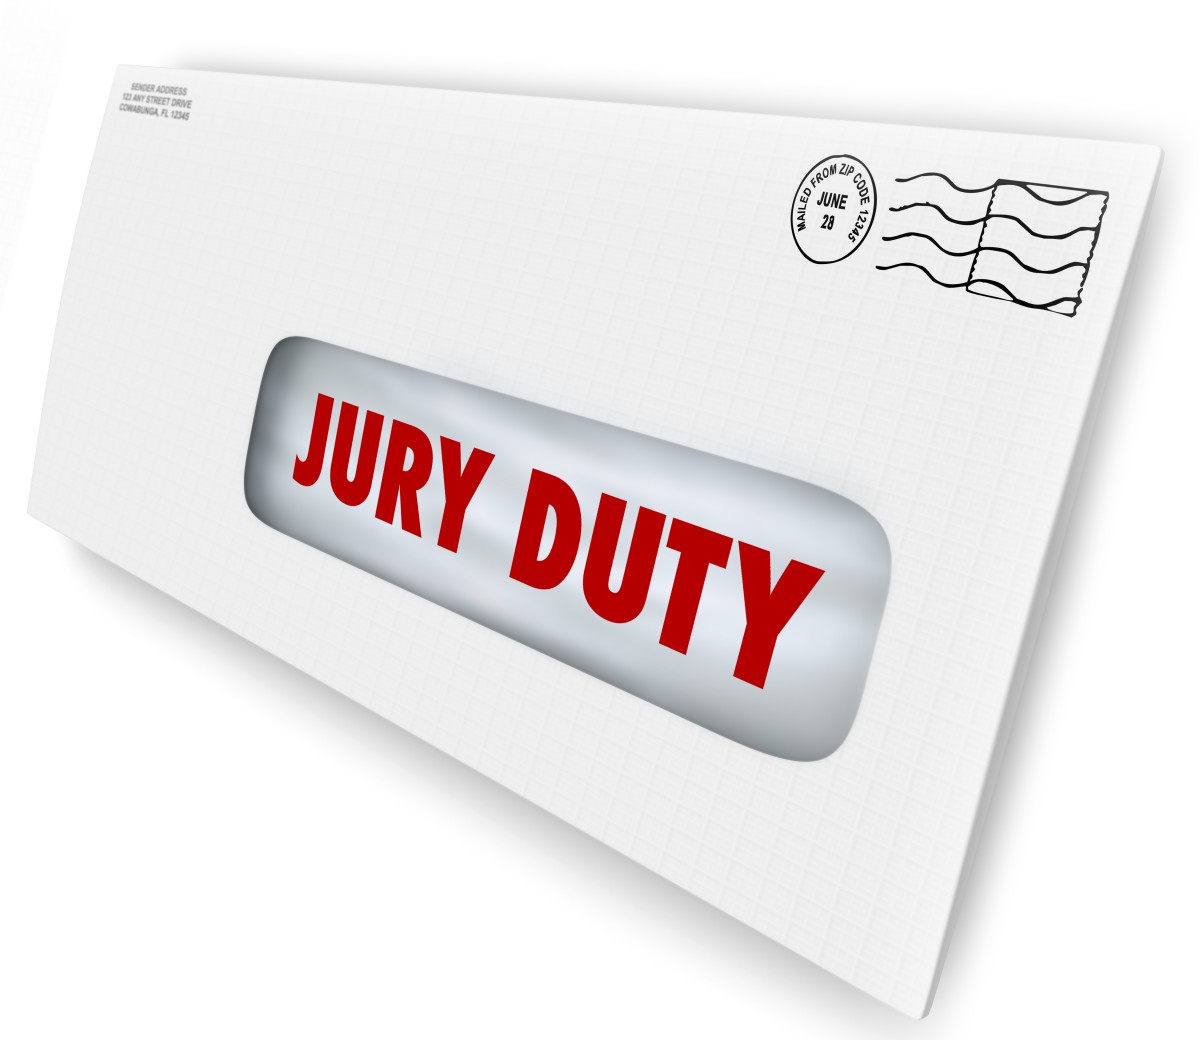 Jury-Duty-Pay-Requirements.jpg